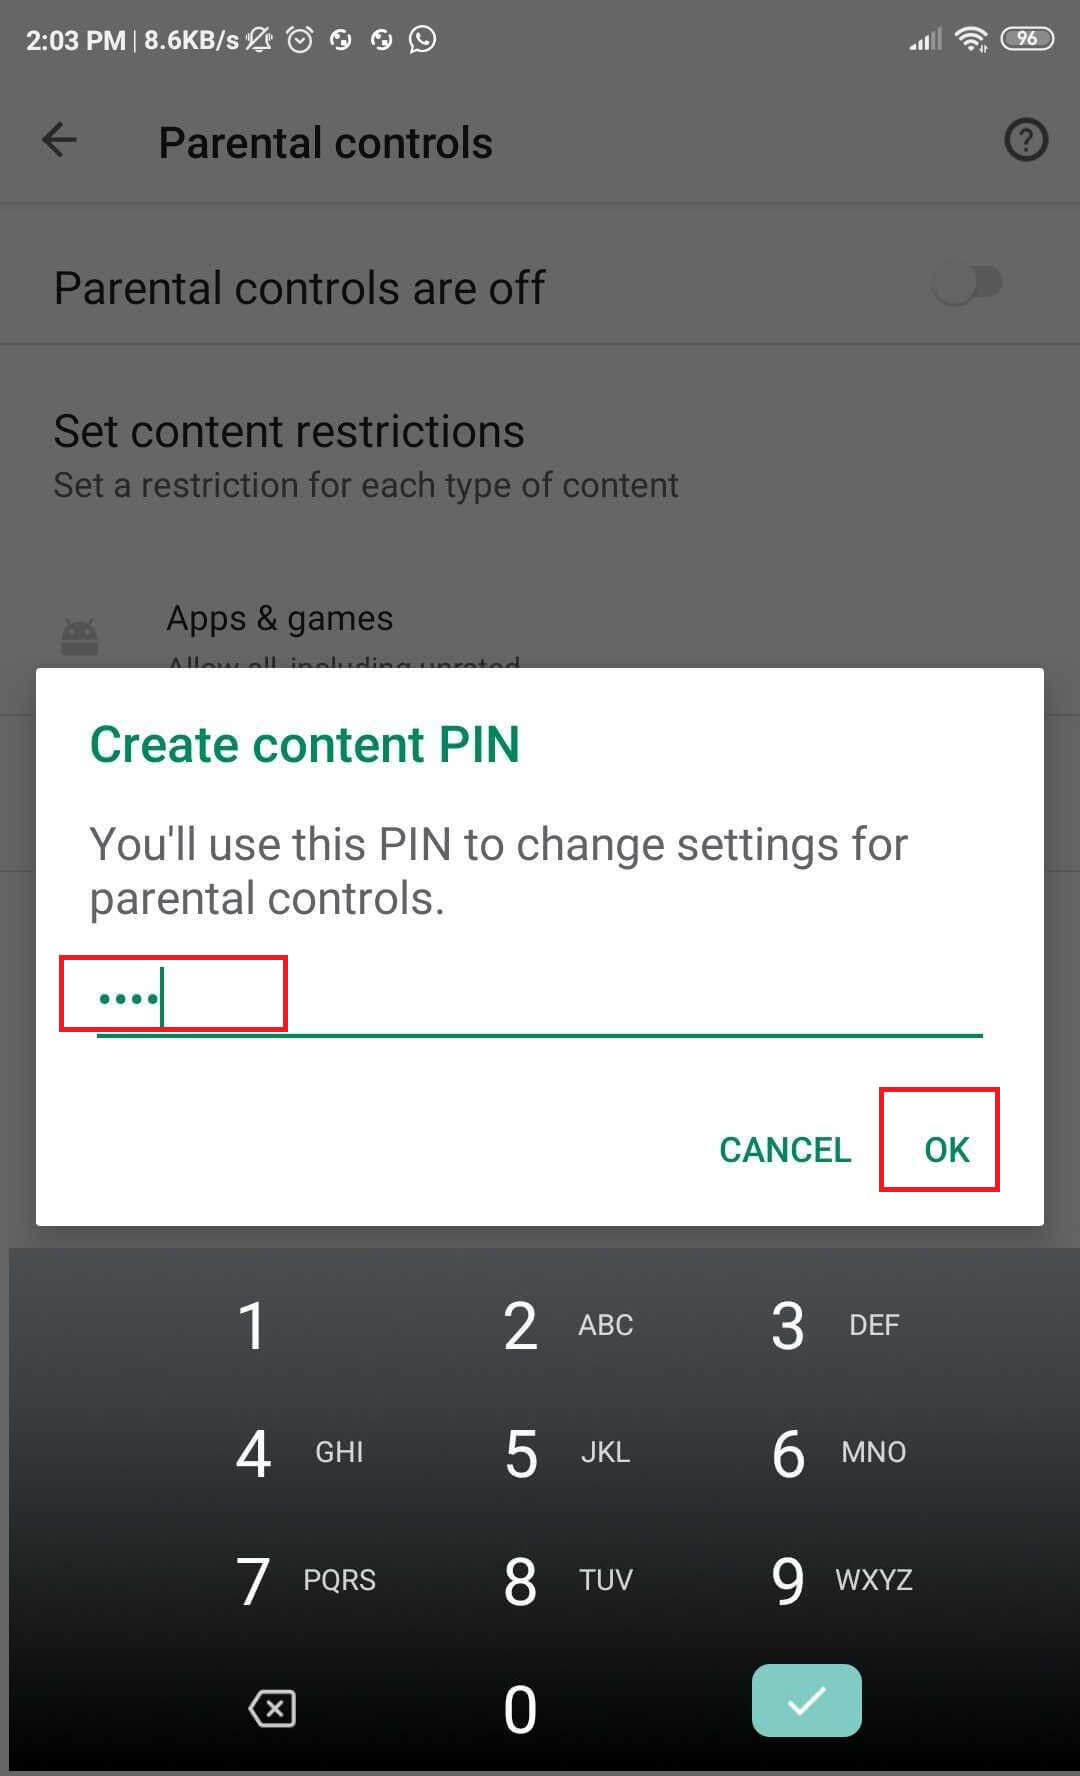 Enable it and set-up the PIN.